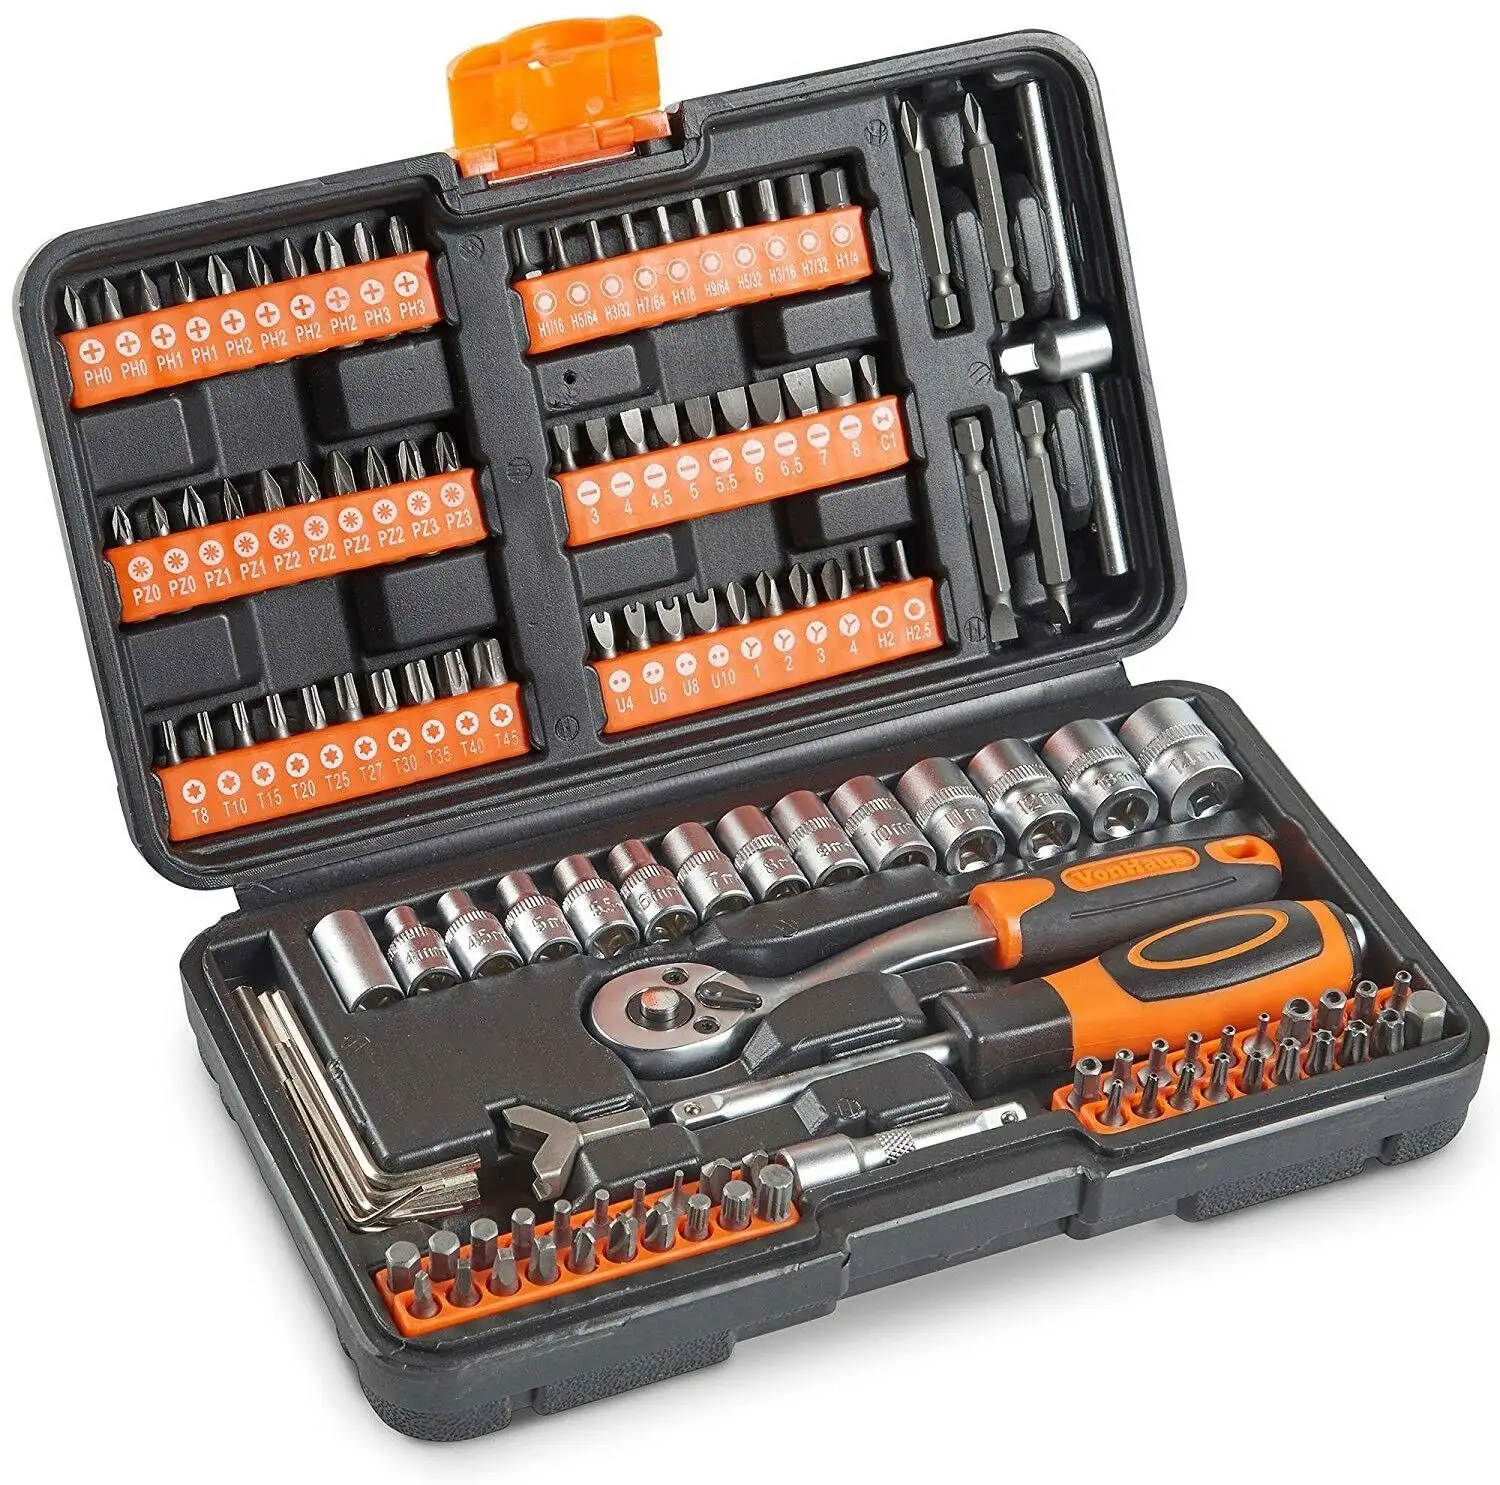 hand tool kit Hot Selling 130-piece 1/4" Sockets Set With Carry Case